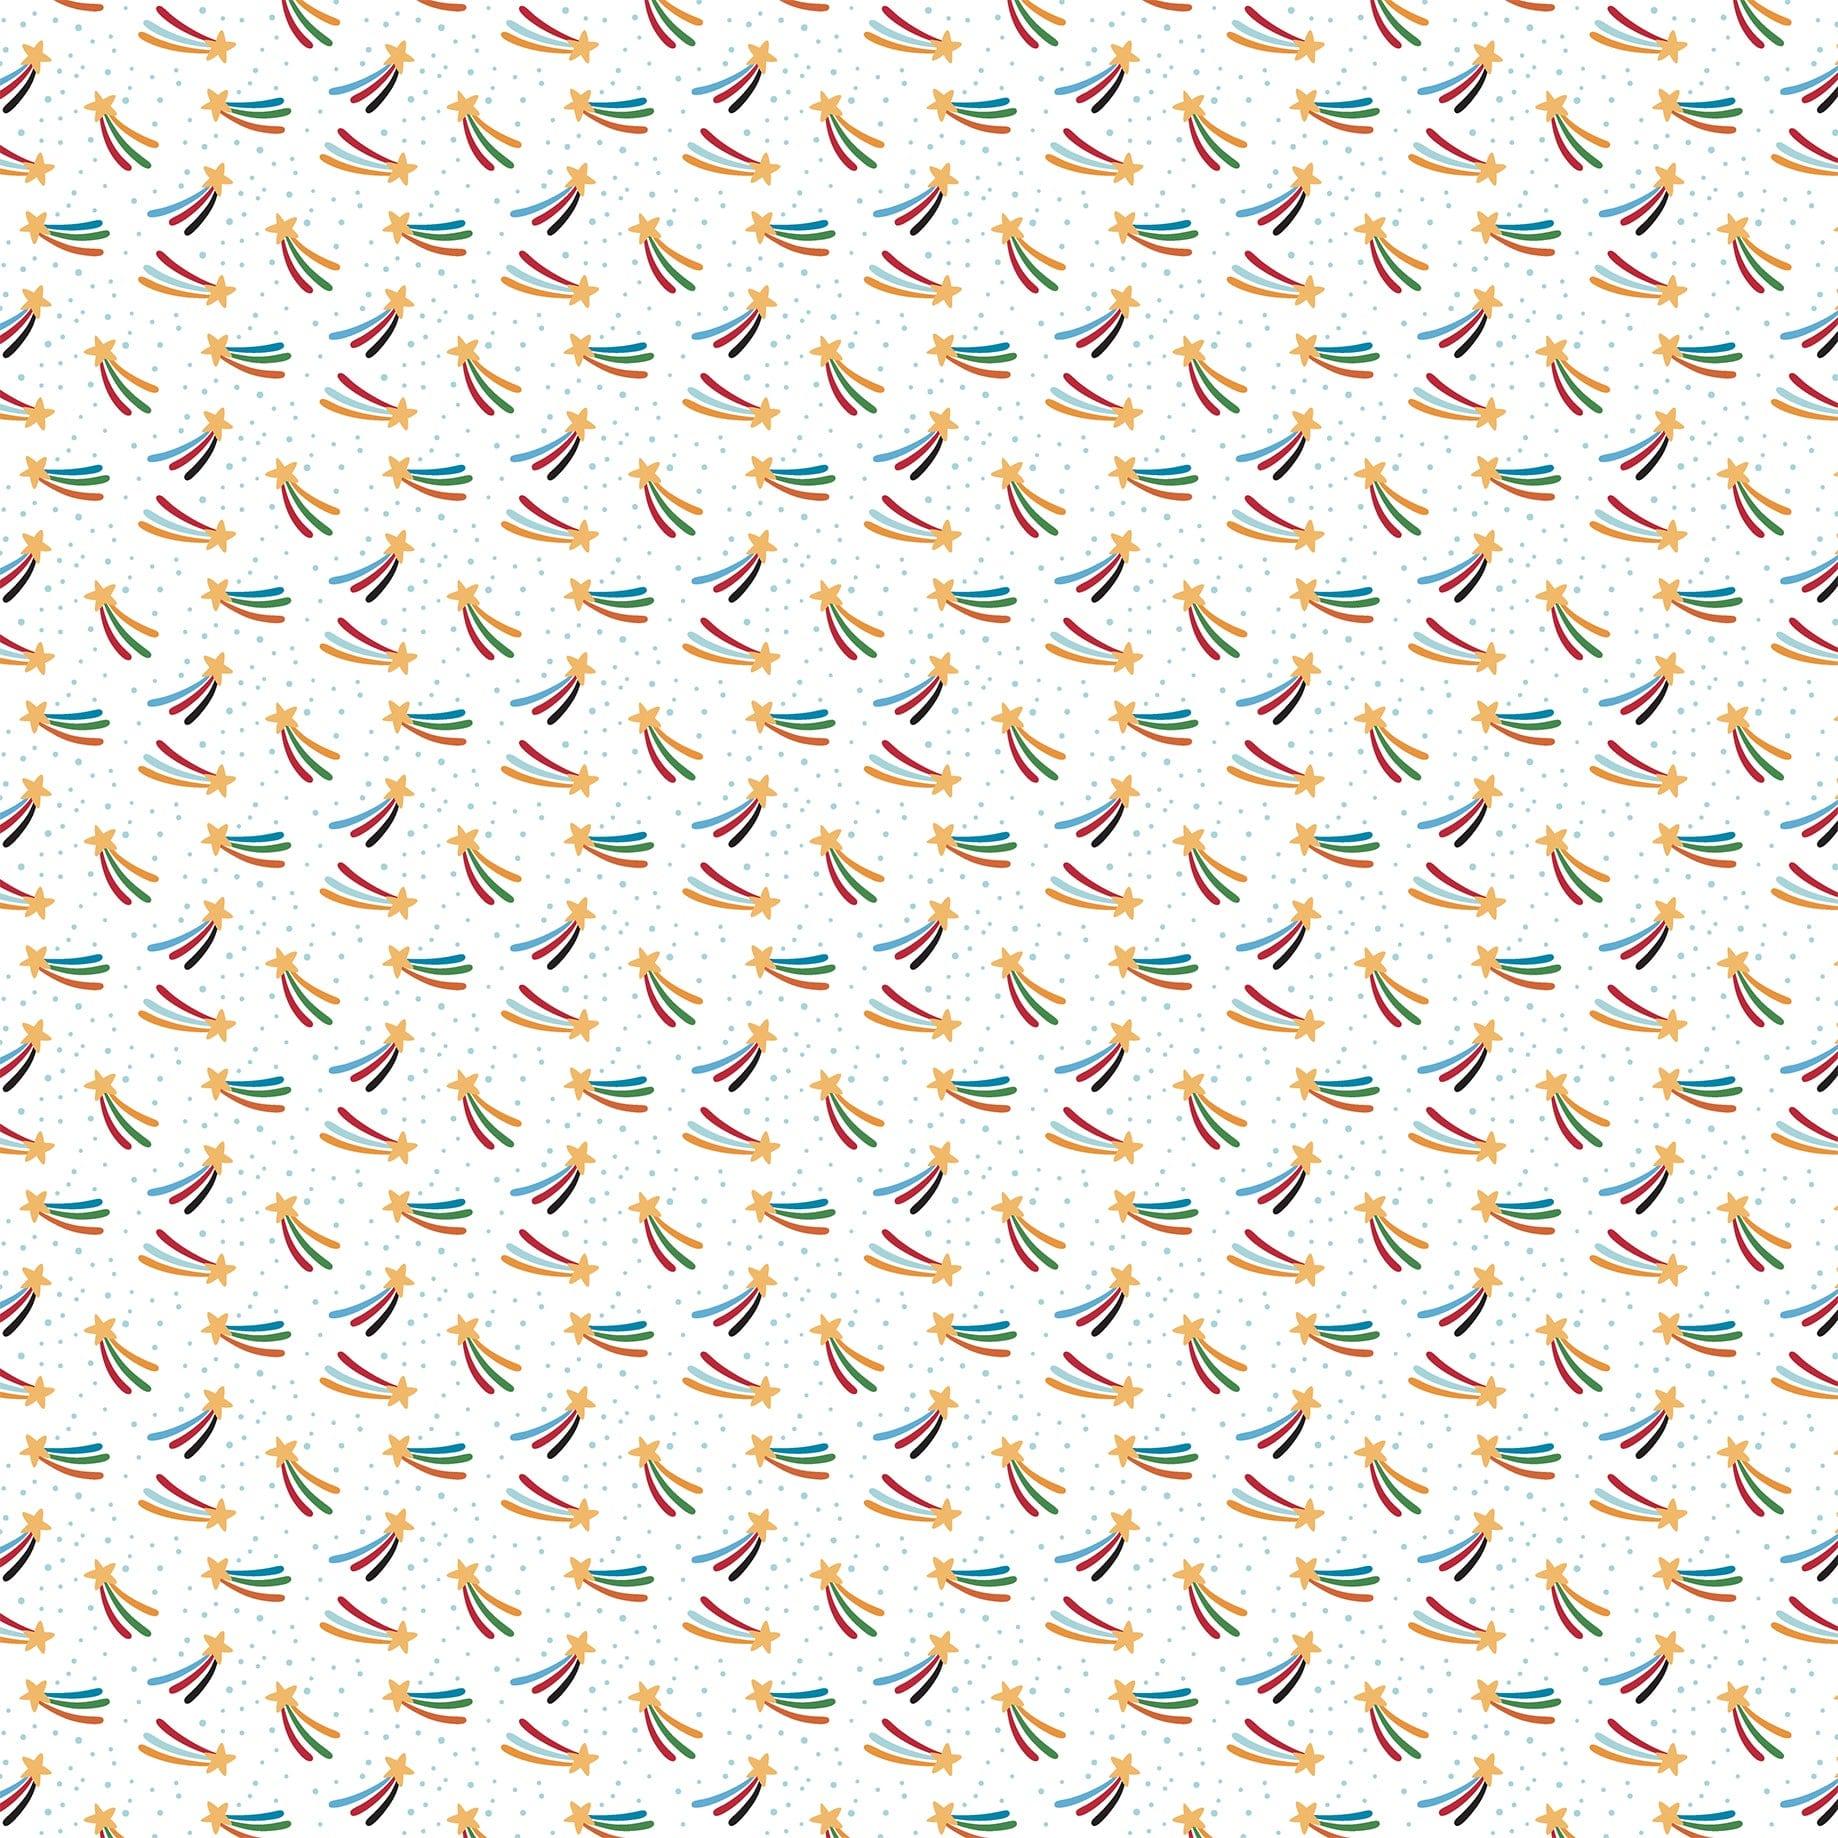 Play All Day Boy Collection Helicopter Trails 12 x 12 Double-Sided Scrapbook Paper by Echo Park Paper - Scrapbook Supply Companies